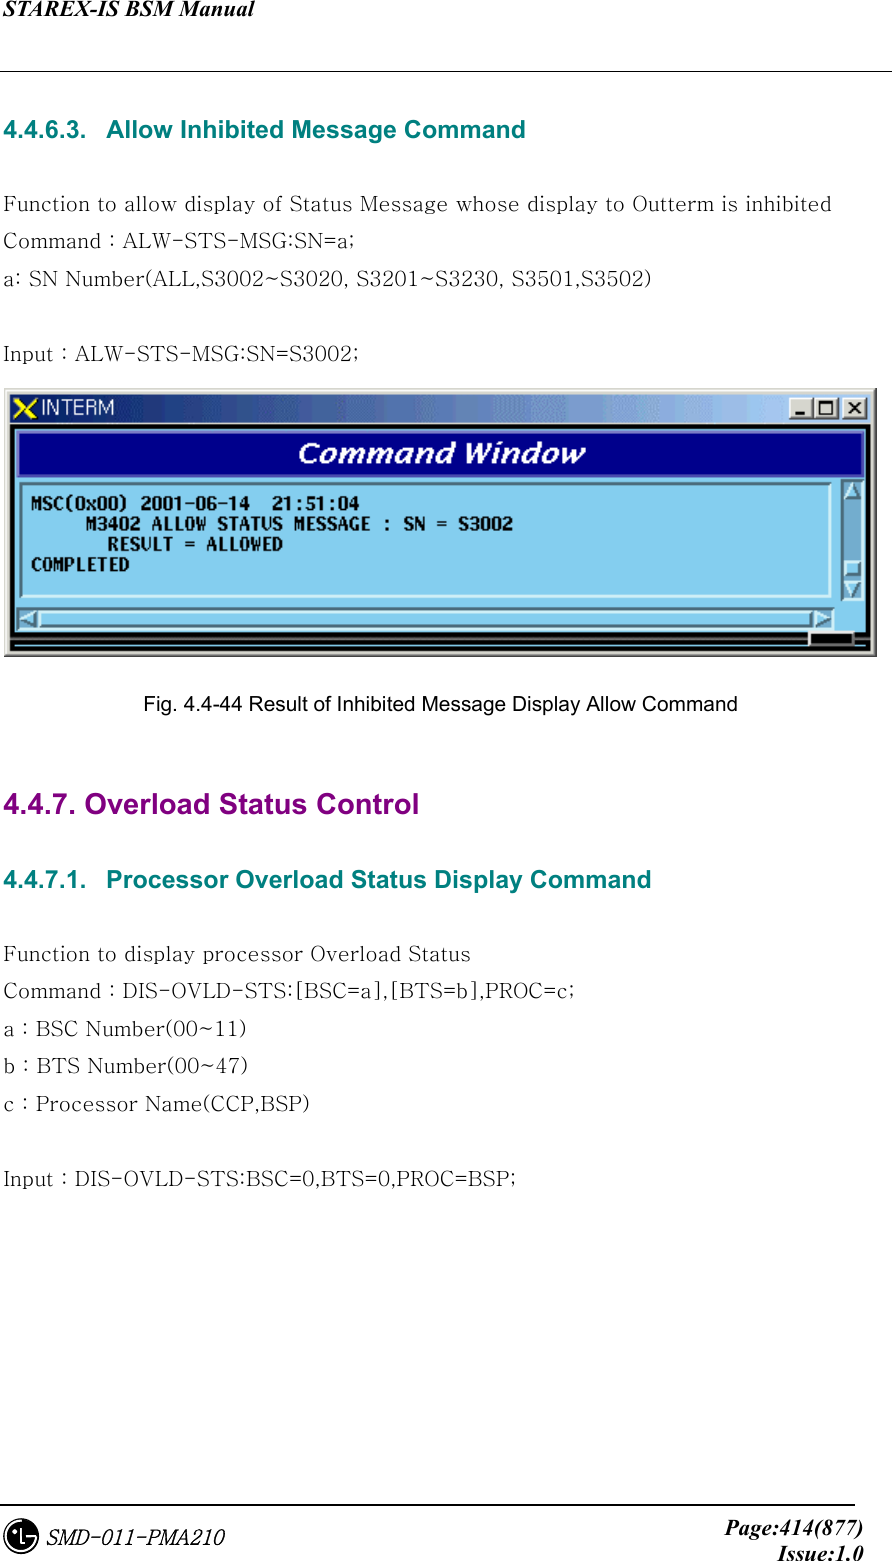 STAREX-IS BSM Manual     Page:414(877)Issue:1.0SMD-011-PMA210  4.4.6.3.   Allow Inhibited Message Command  Function to allow display of Status Message whose display to Outterm is inhibited   Command : ALW-STS-MSG:SN=a; a: SN Number(ALL,S3002~S3020, S3201~S3230, S3501,S3502)  Input : ALW-STS-MSG:SN=S3002;  Fig. 4.4-44 Result of Inhibited Message Display Allow Command  4.4.7. Overload Status Control  4.4.7.1.   Processor Overload Status Display Command  Function to display processor Overload Status Command : DIS-OVLD-STS:[BSC=a],[BTS=b],PROC=c; a : BSC Number(00~11) b : BTS Number(00~47) c : Processor Name(CCP,BSP)  Input : DIS-OVLD-STS:BSC=0,BTS=0,PROC=BSP; 